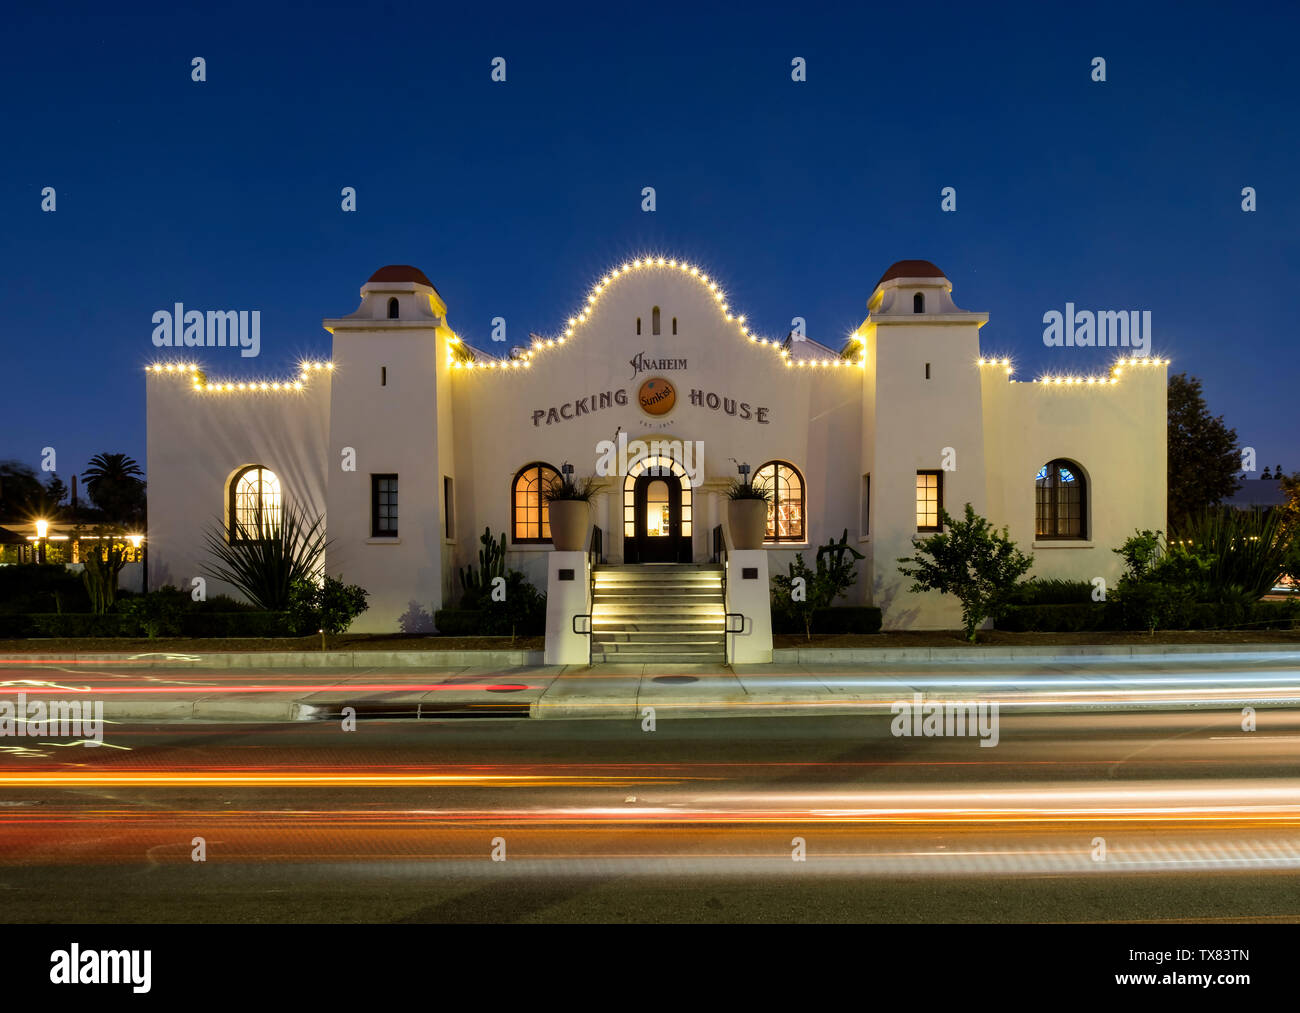 The Packing House at night, Anaheim, Los Angeles, California, USA Stock Photo